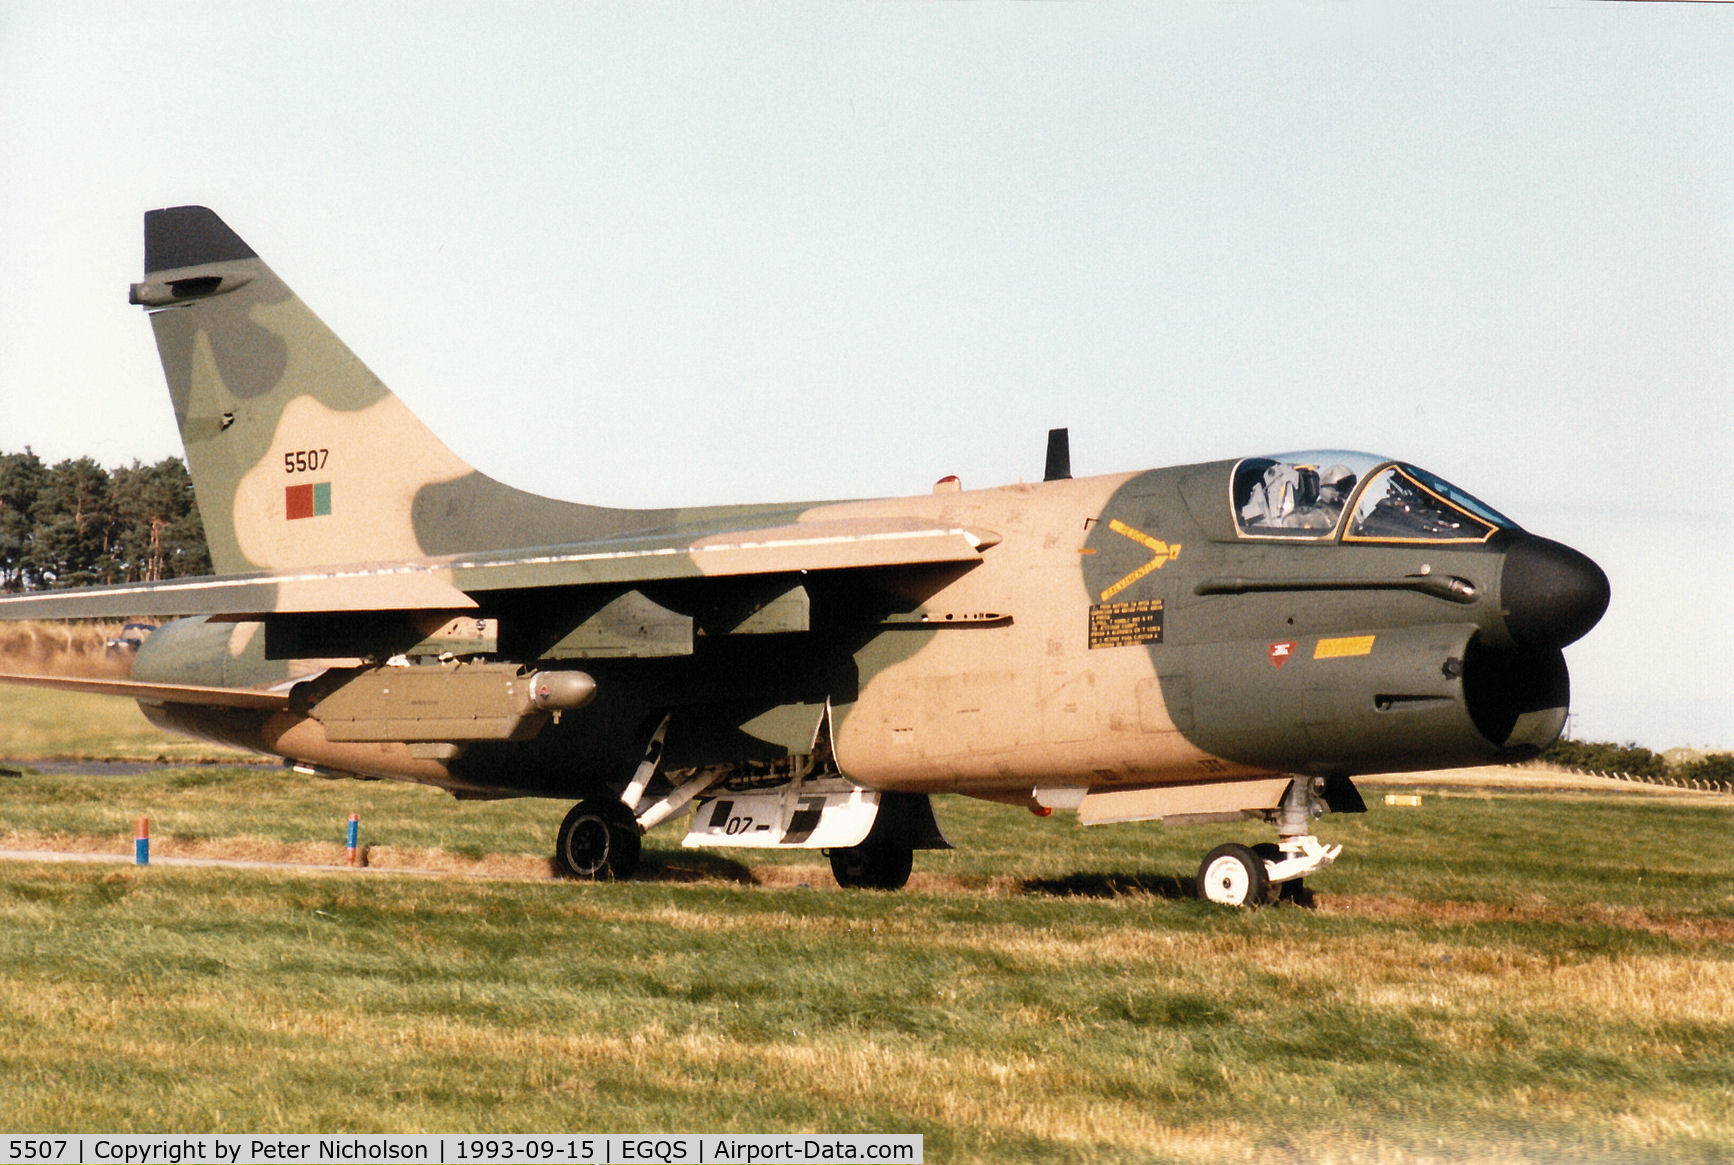 5507, LTV A-7P Corsair II C/N A-103/P-007, Portuguese Air Force A-7P Corsair II of 304 Esquadron taxying to Runway 05 at RAF Lossiemouth in September 1993.